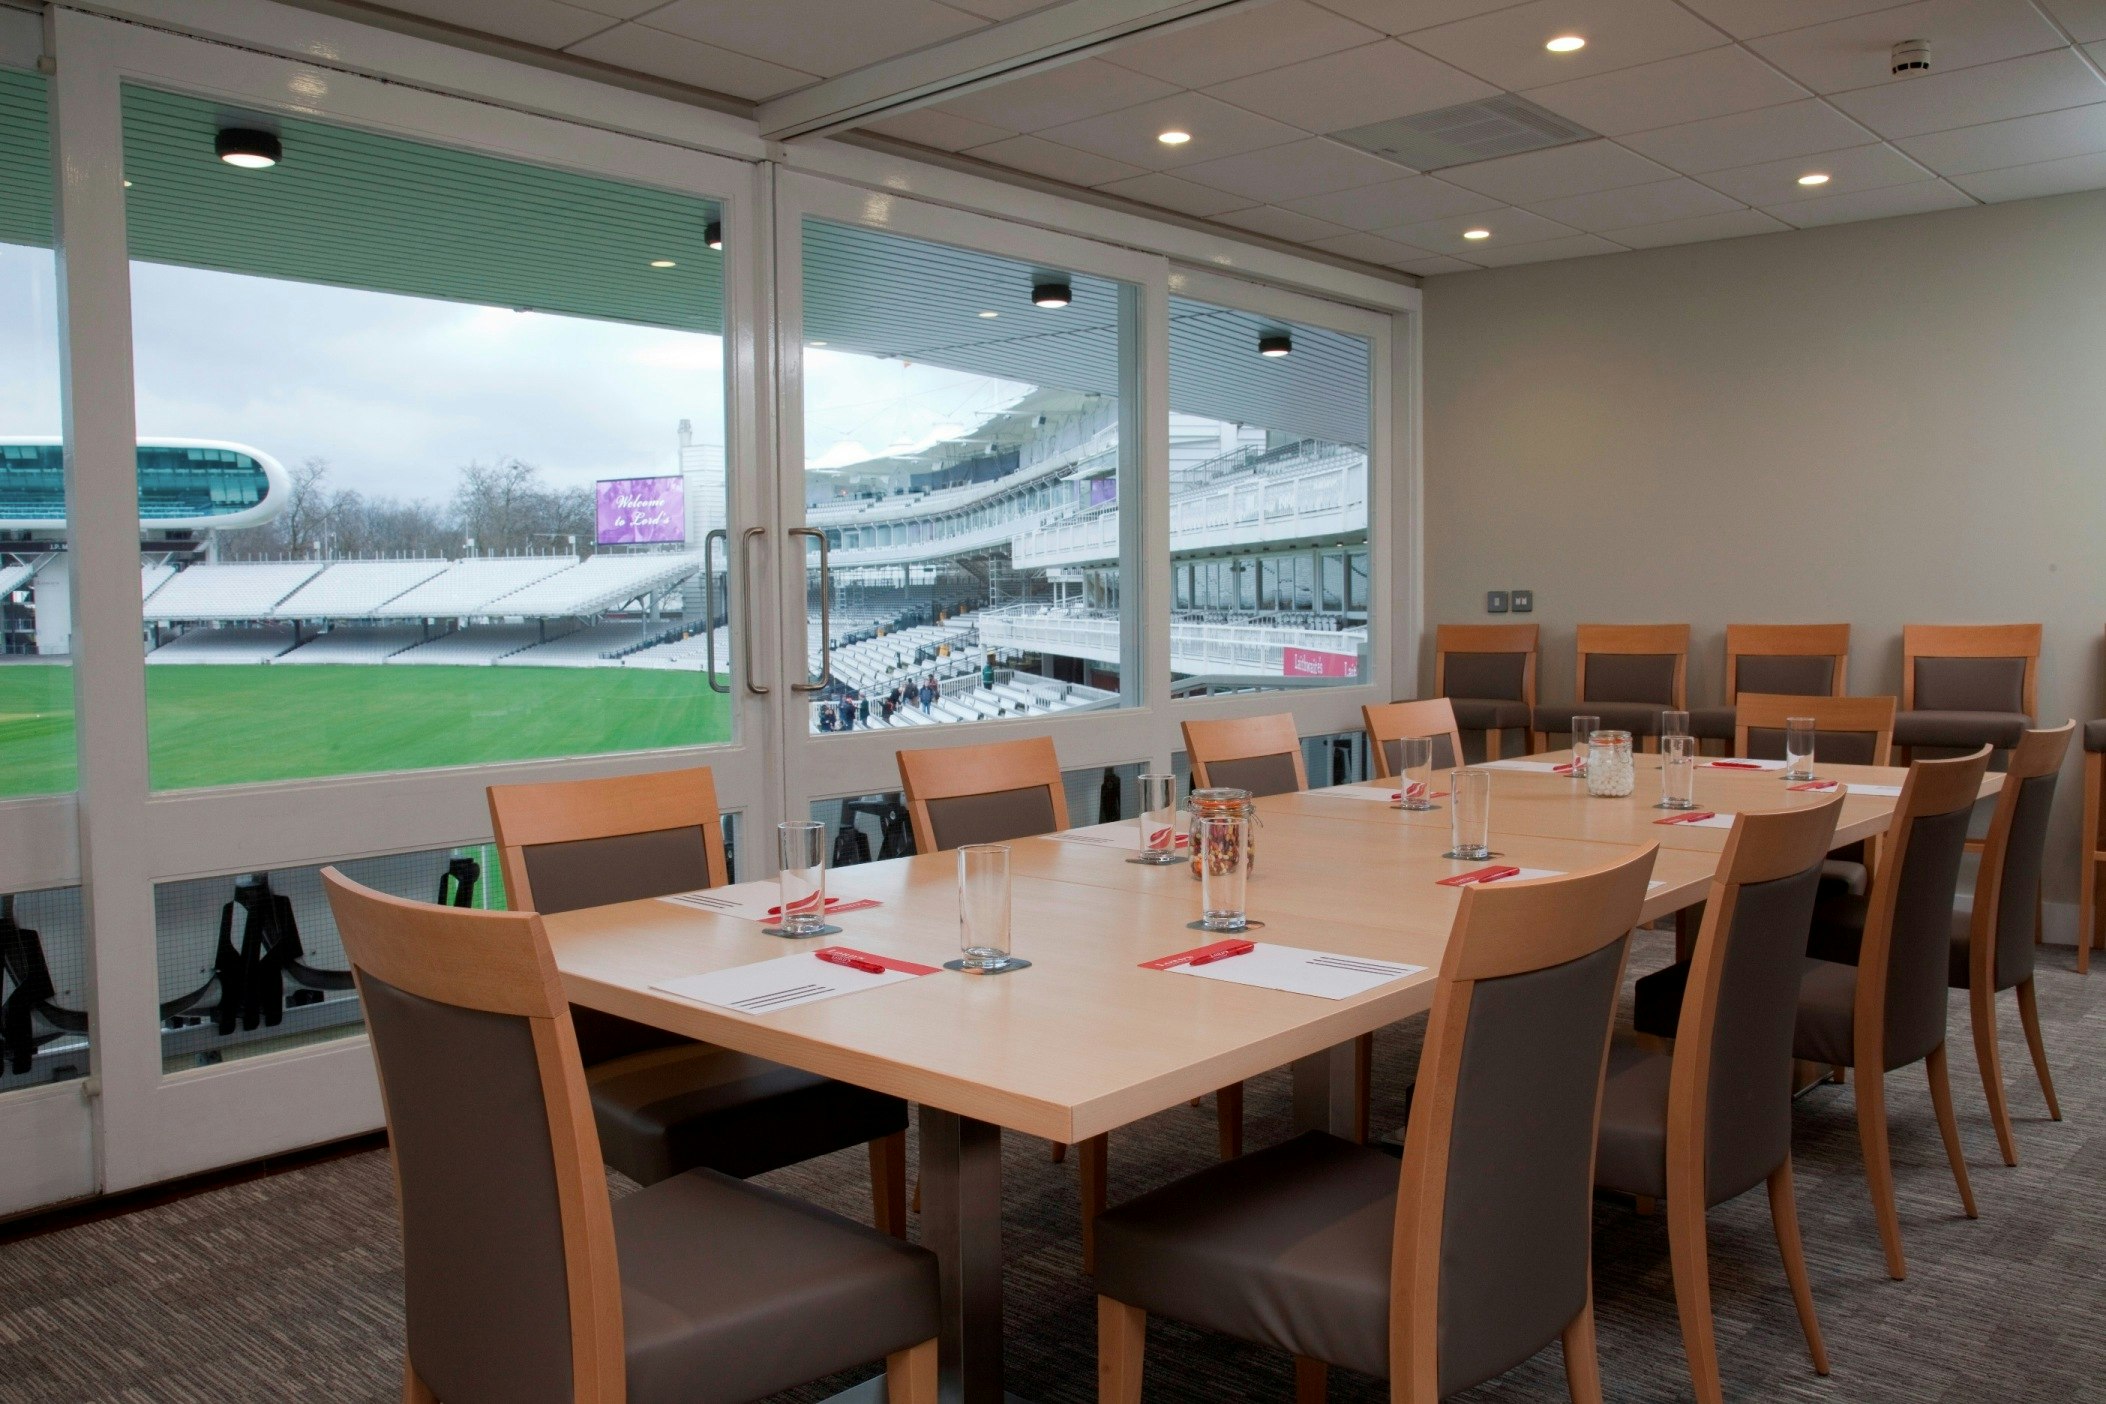 Meeting Rooms Venues in West London - Lord's Cricket Ground